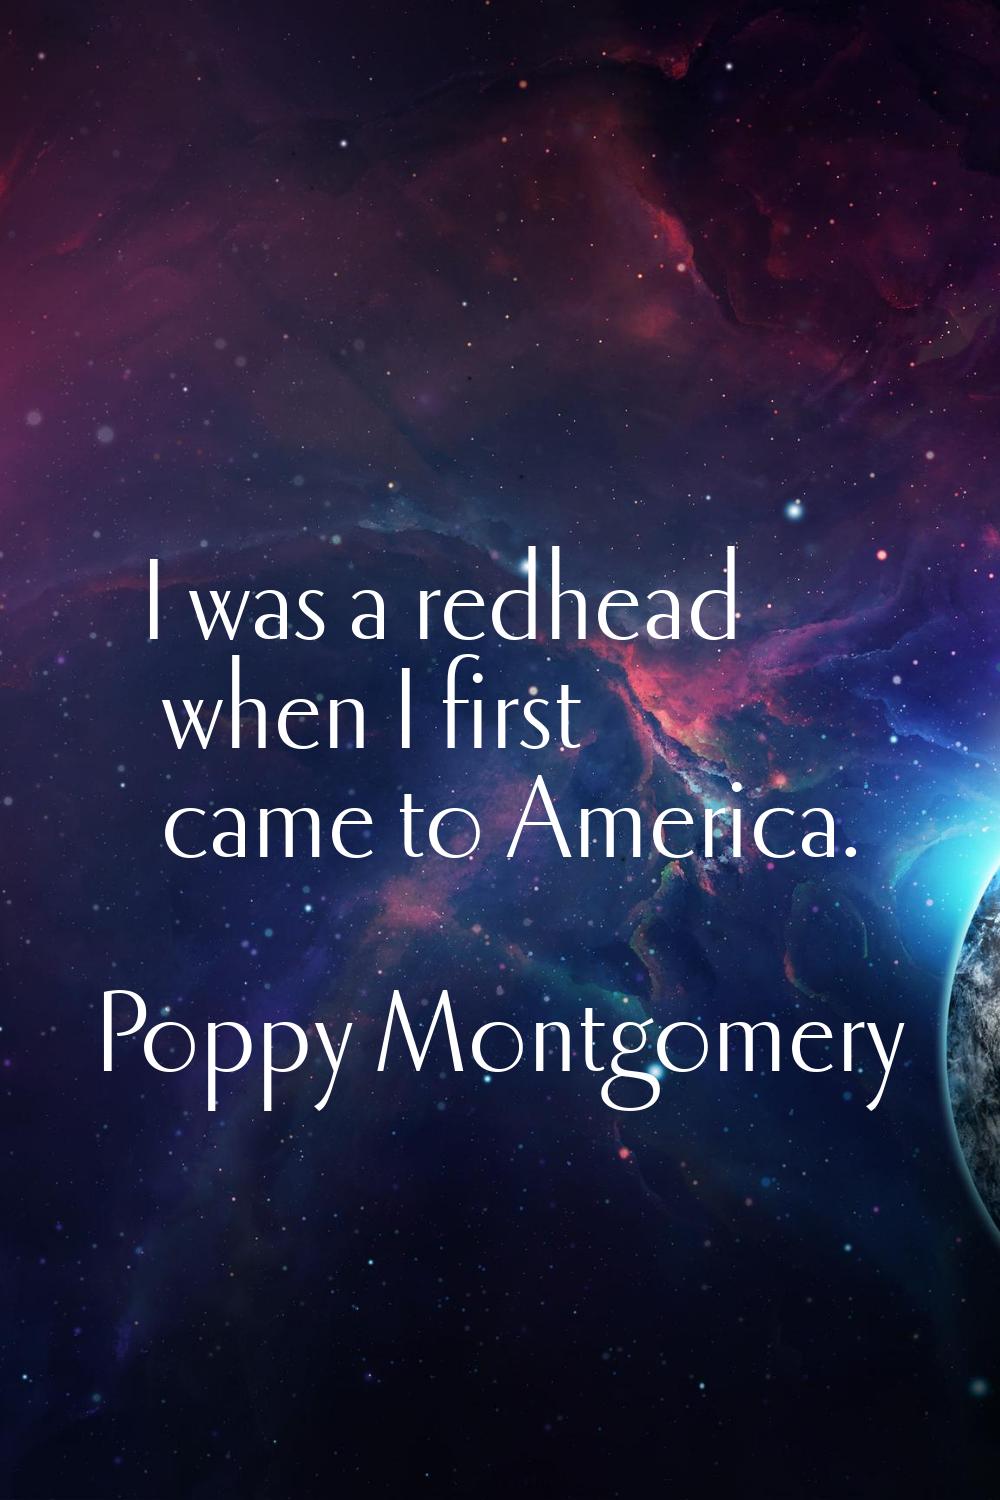 I was a redhead when I first came to America.